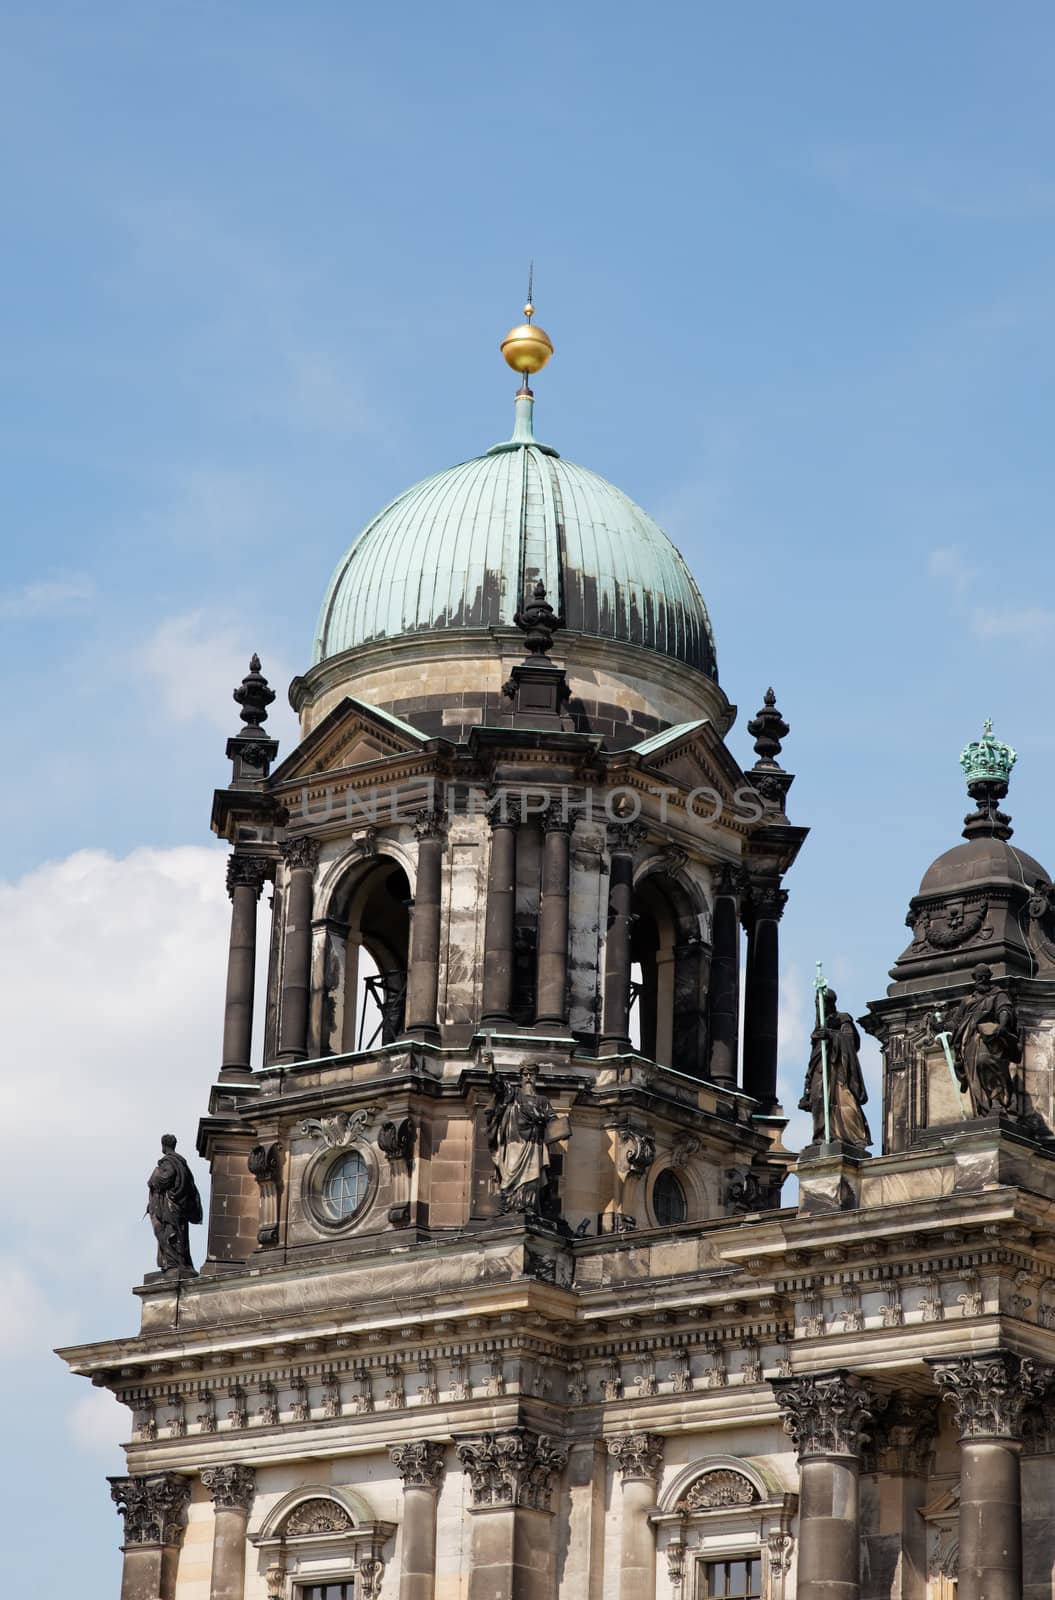 the Berliner Dom in central Berlin Germany 